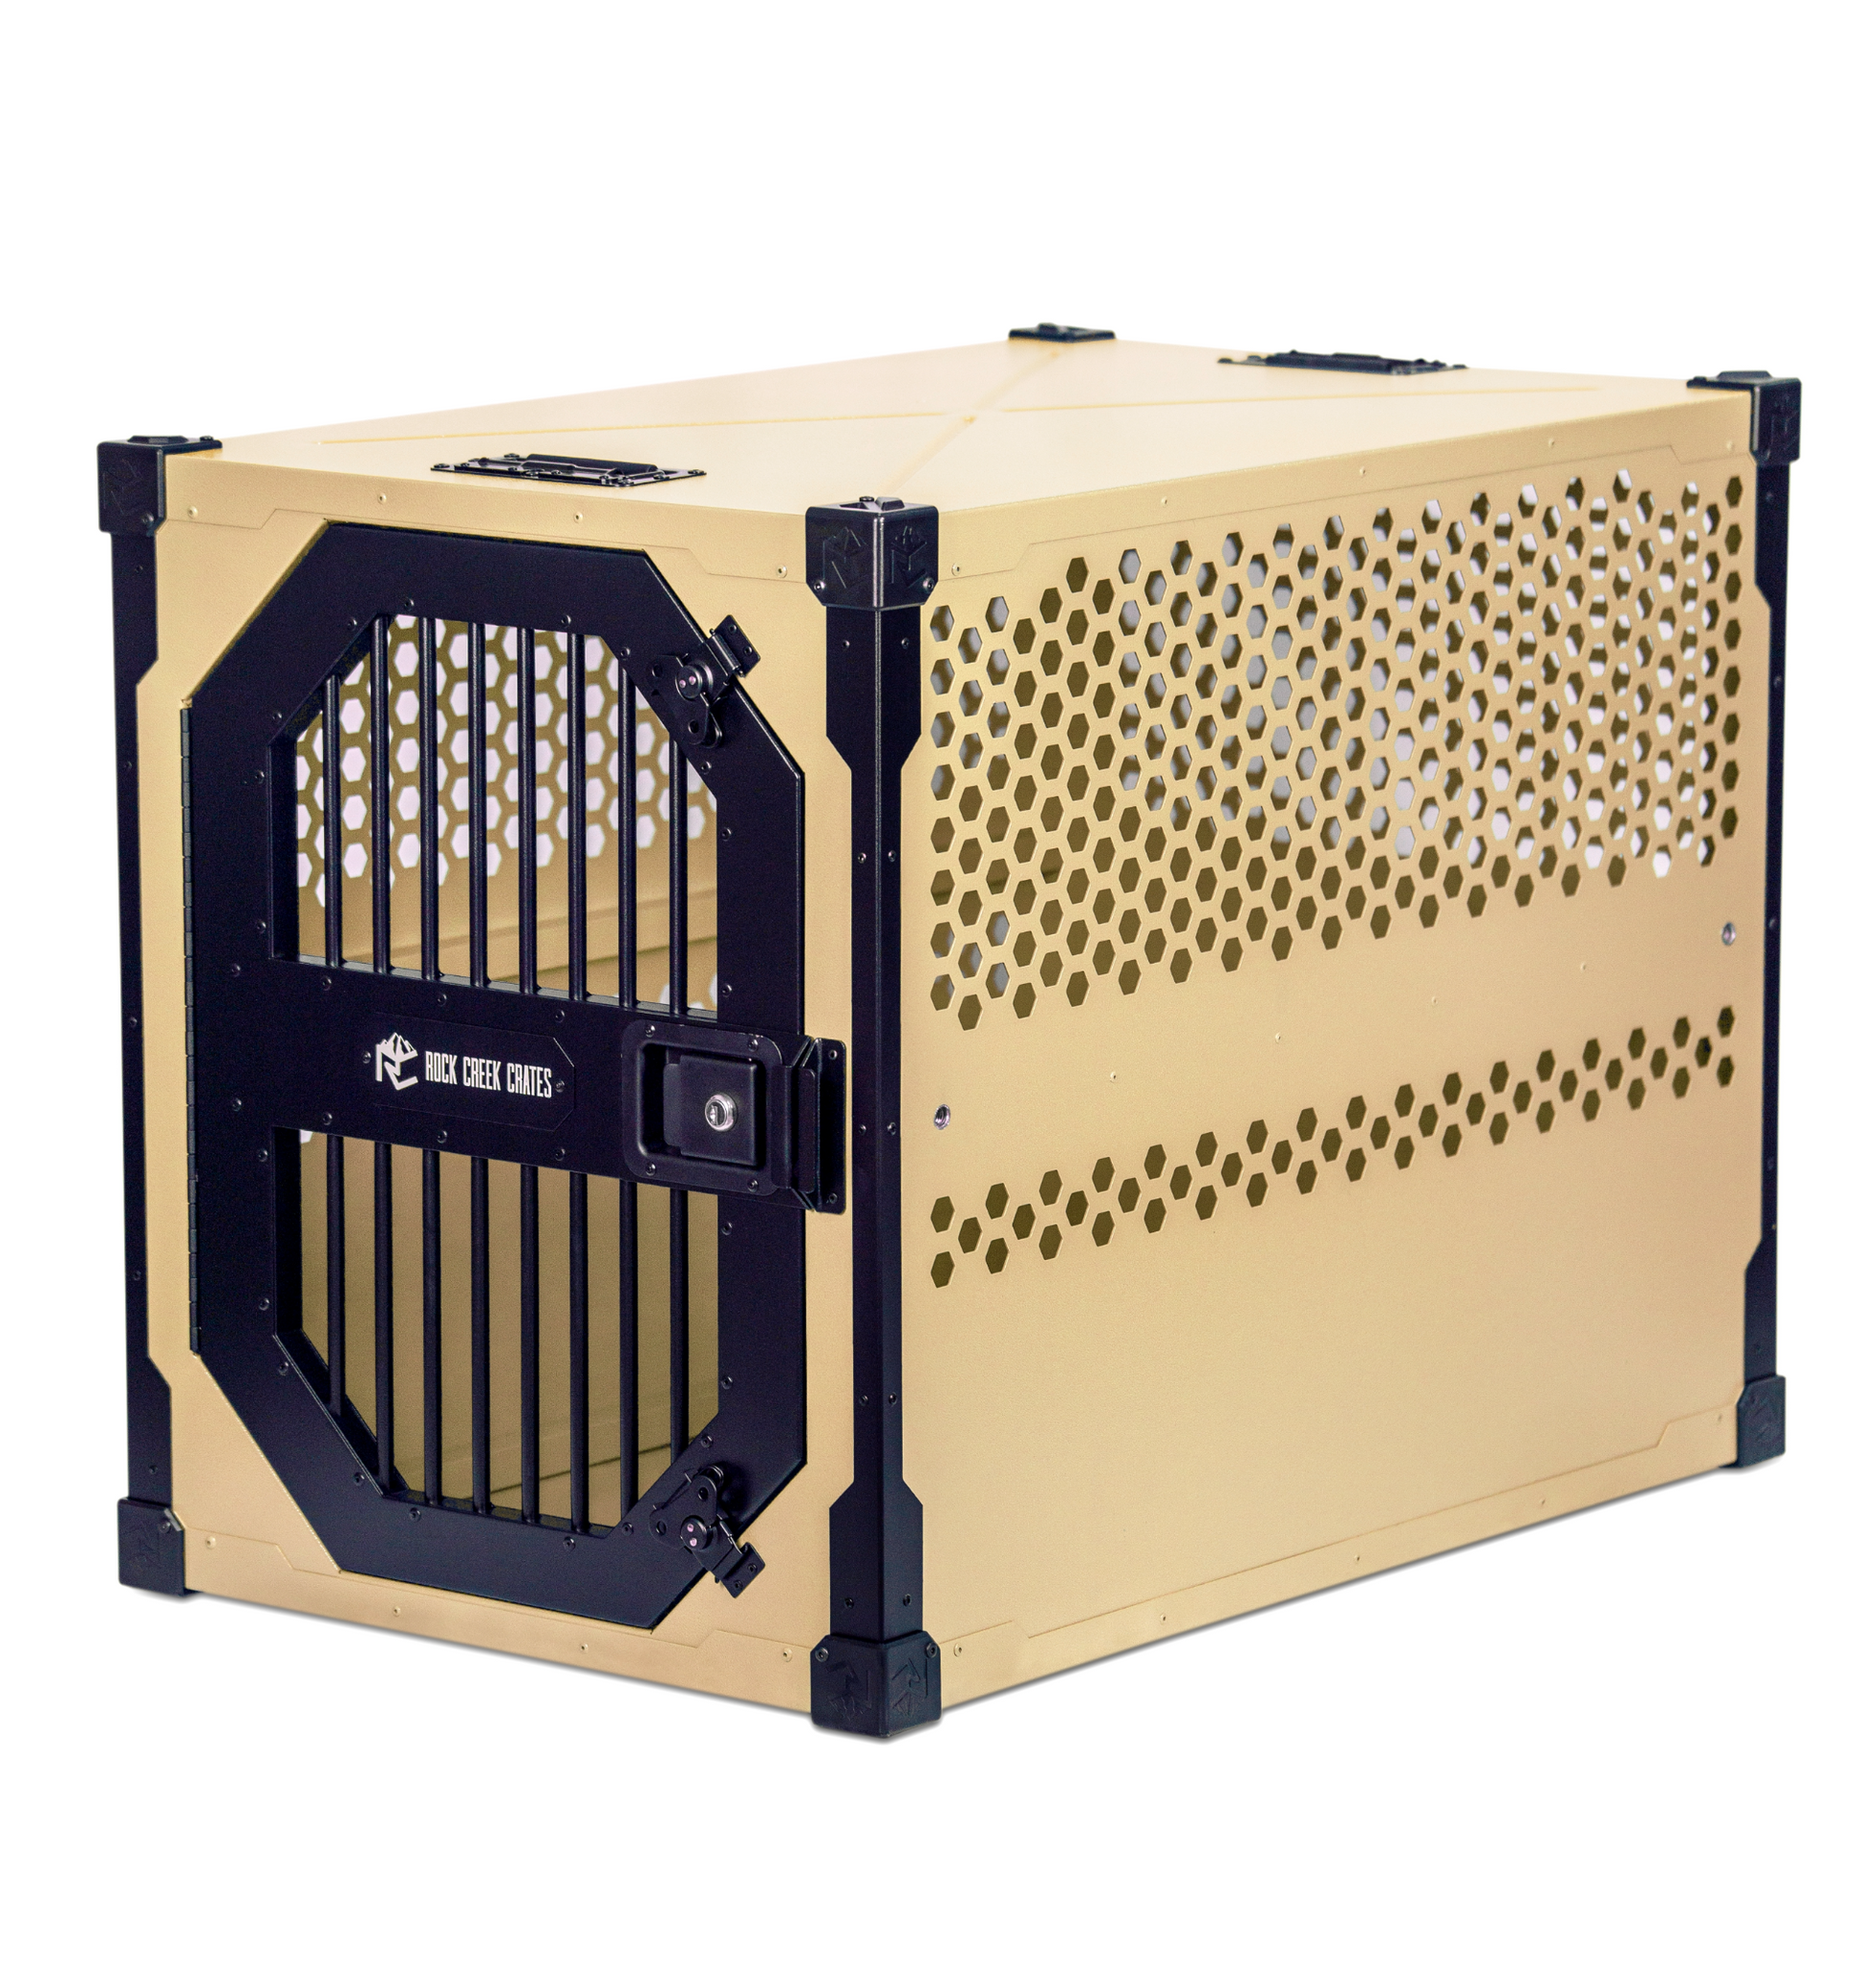 Sand Dune Stationary dog crate by Rock Creek Crates